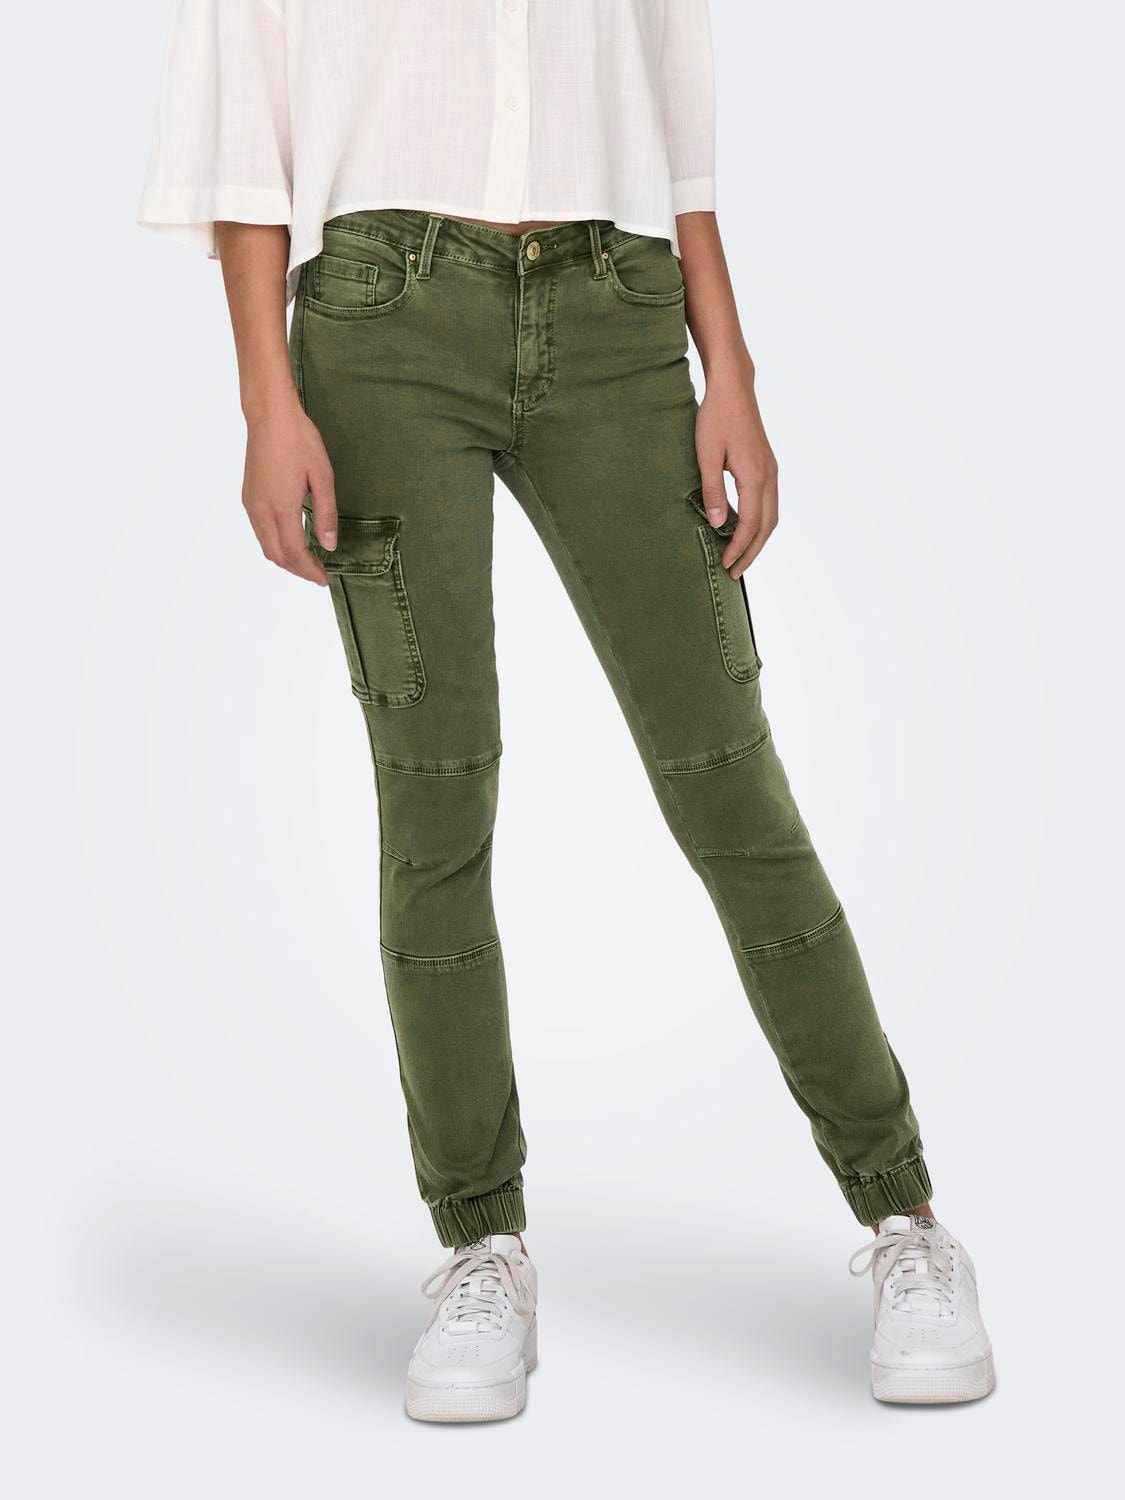 ONLY Cropped fit Cargo broek -Kalamata - 15170889